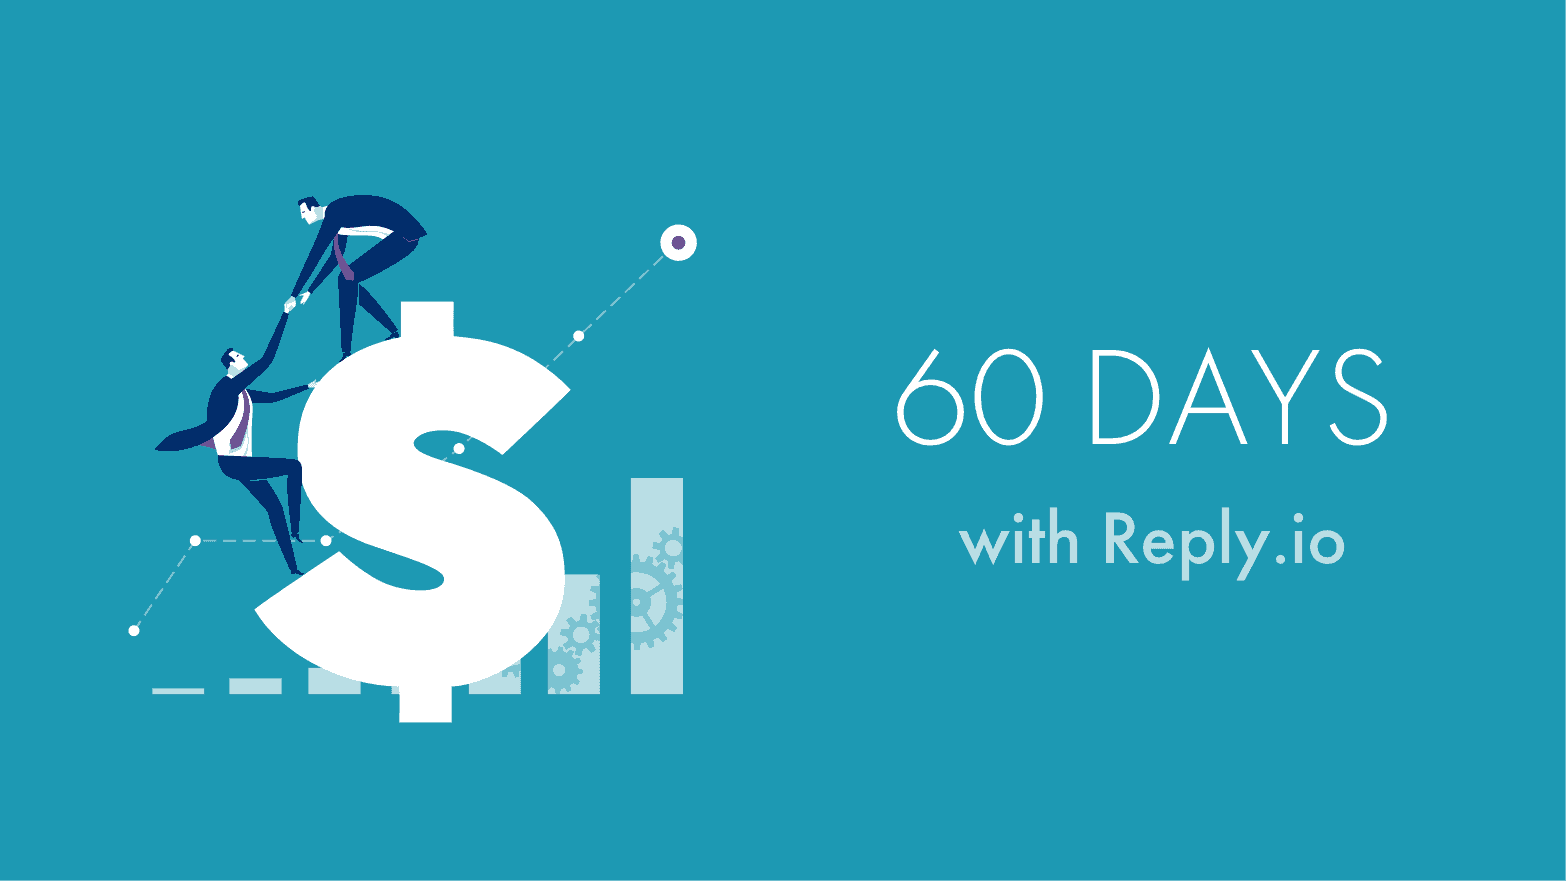 60 days with Reply.io: a man climbing a dollar sign